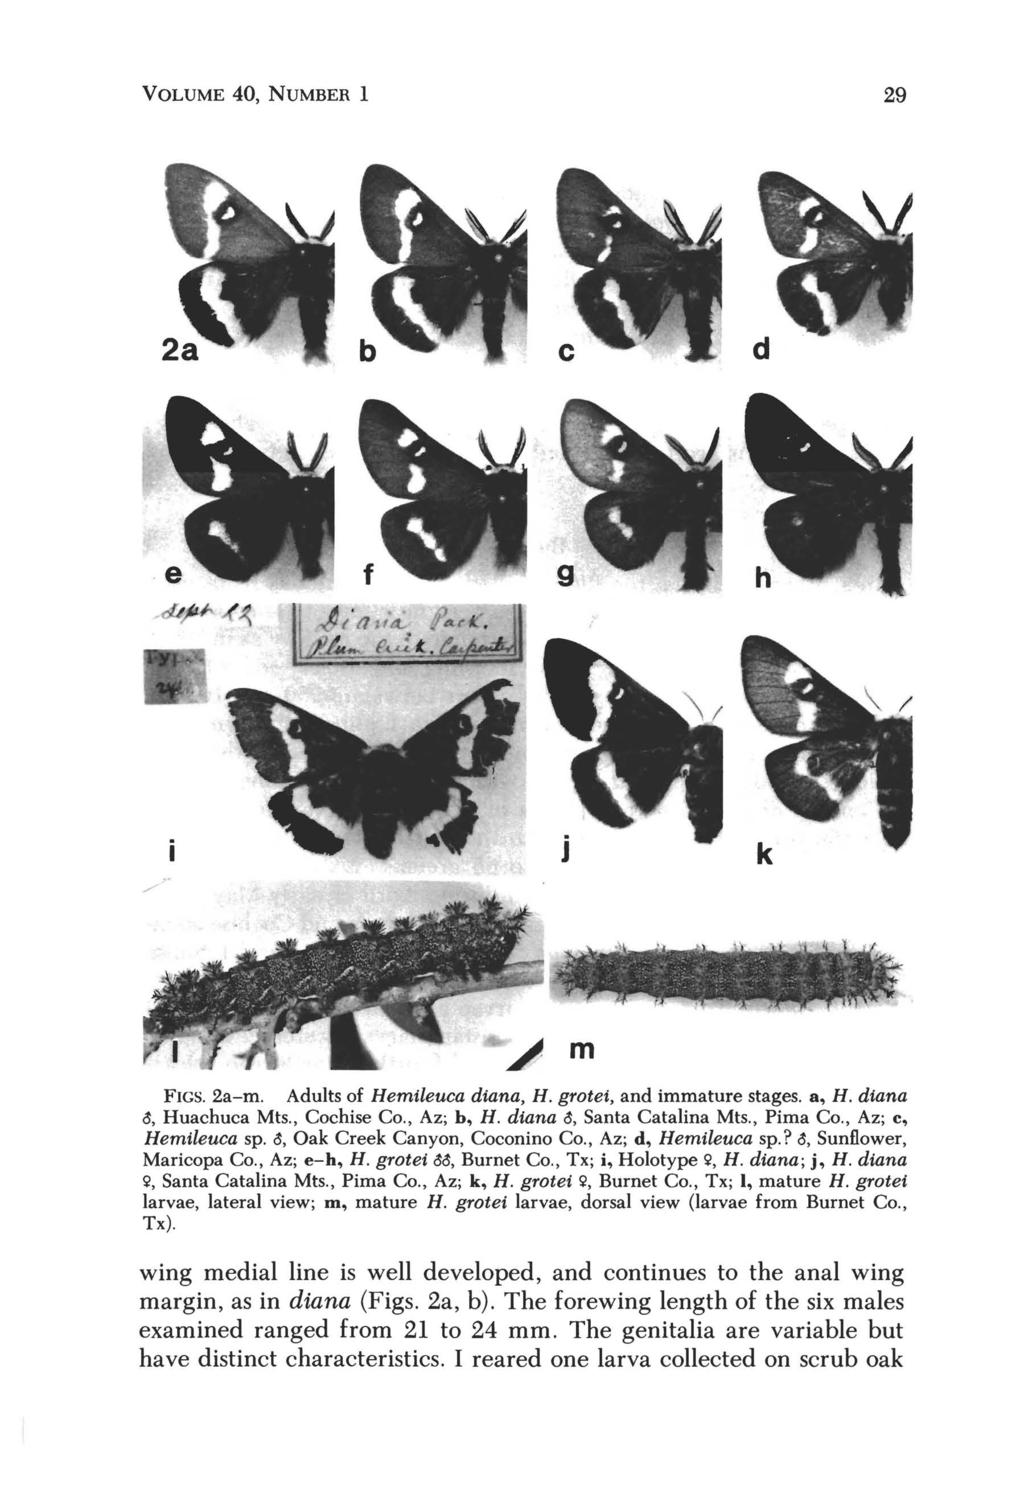 VOLUME 40, NUMBER 1 29 FIGS. 2a-m. Adults of Hemileuca diana, H. grotei, and immature stages. a, H. diana ~, Huachuca Mts., Cochise Co., Az; b, H. diana ~, Santa Catalina Mts., Pima Co.